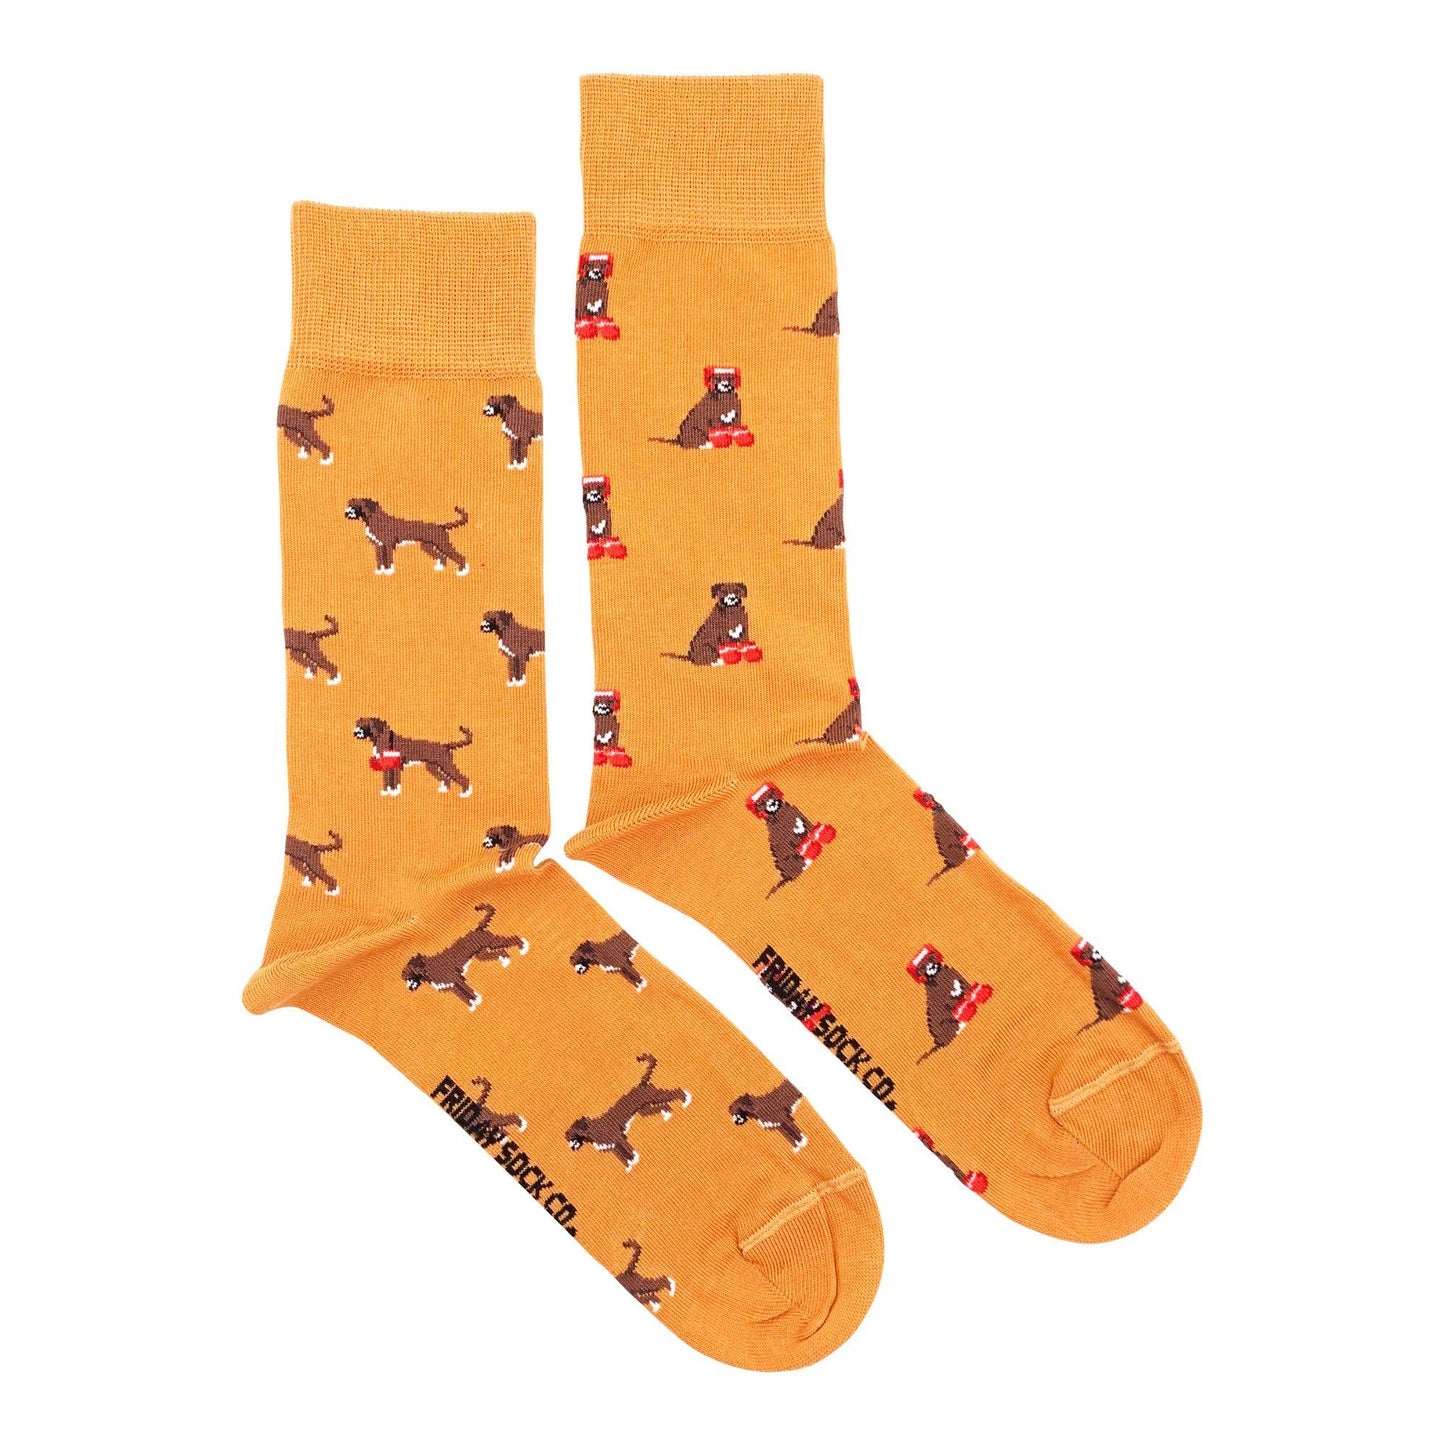 Dog Socks for Men | Boxer | Mismatched | Made in Italy